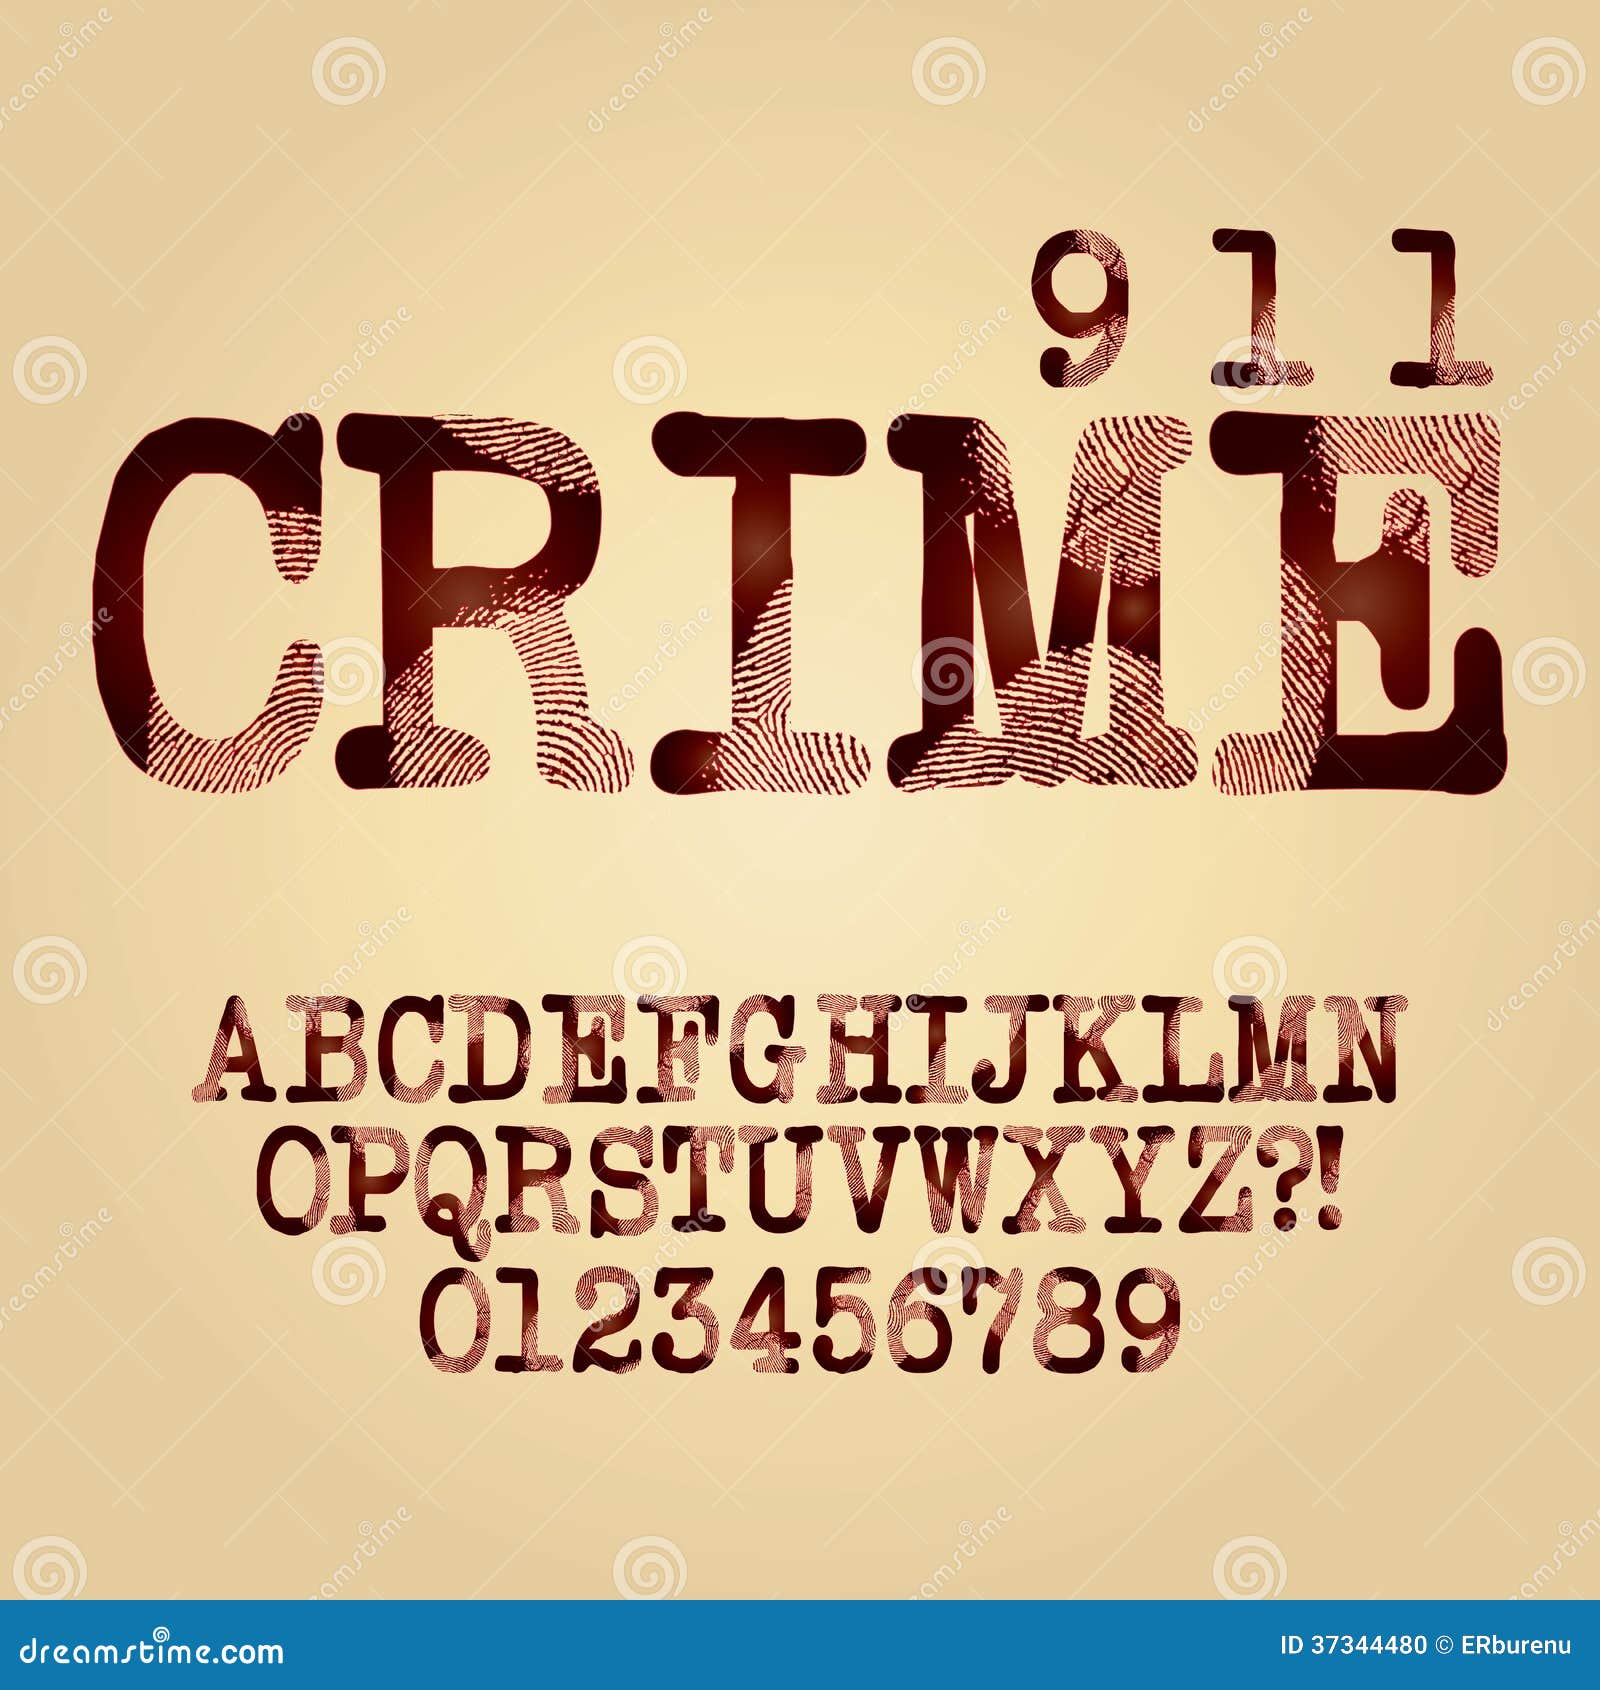 abstract criminal alphabet and digit 